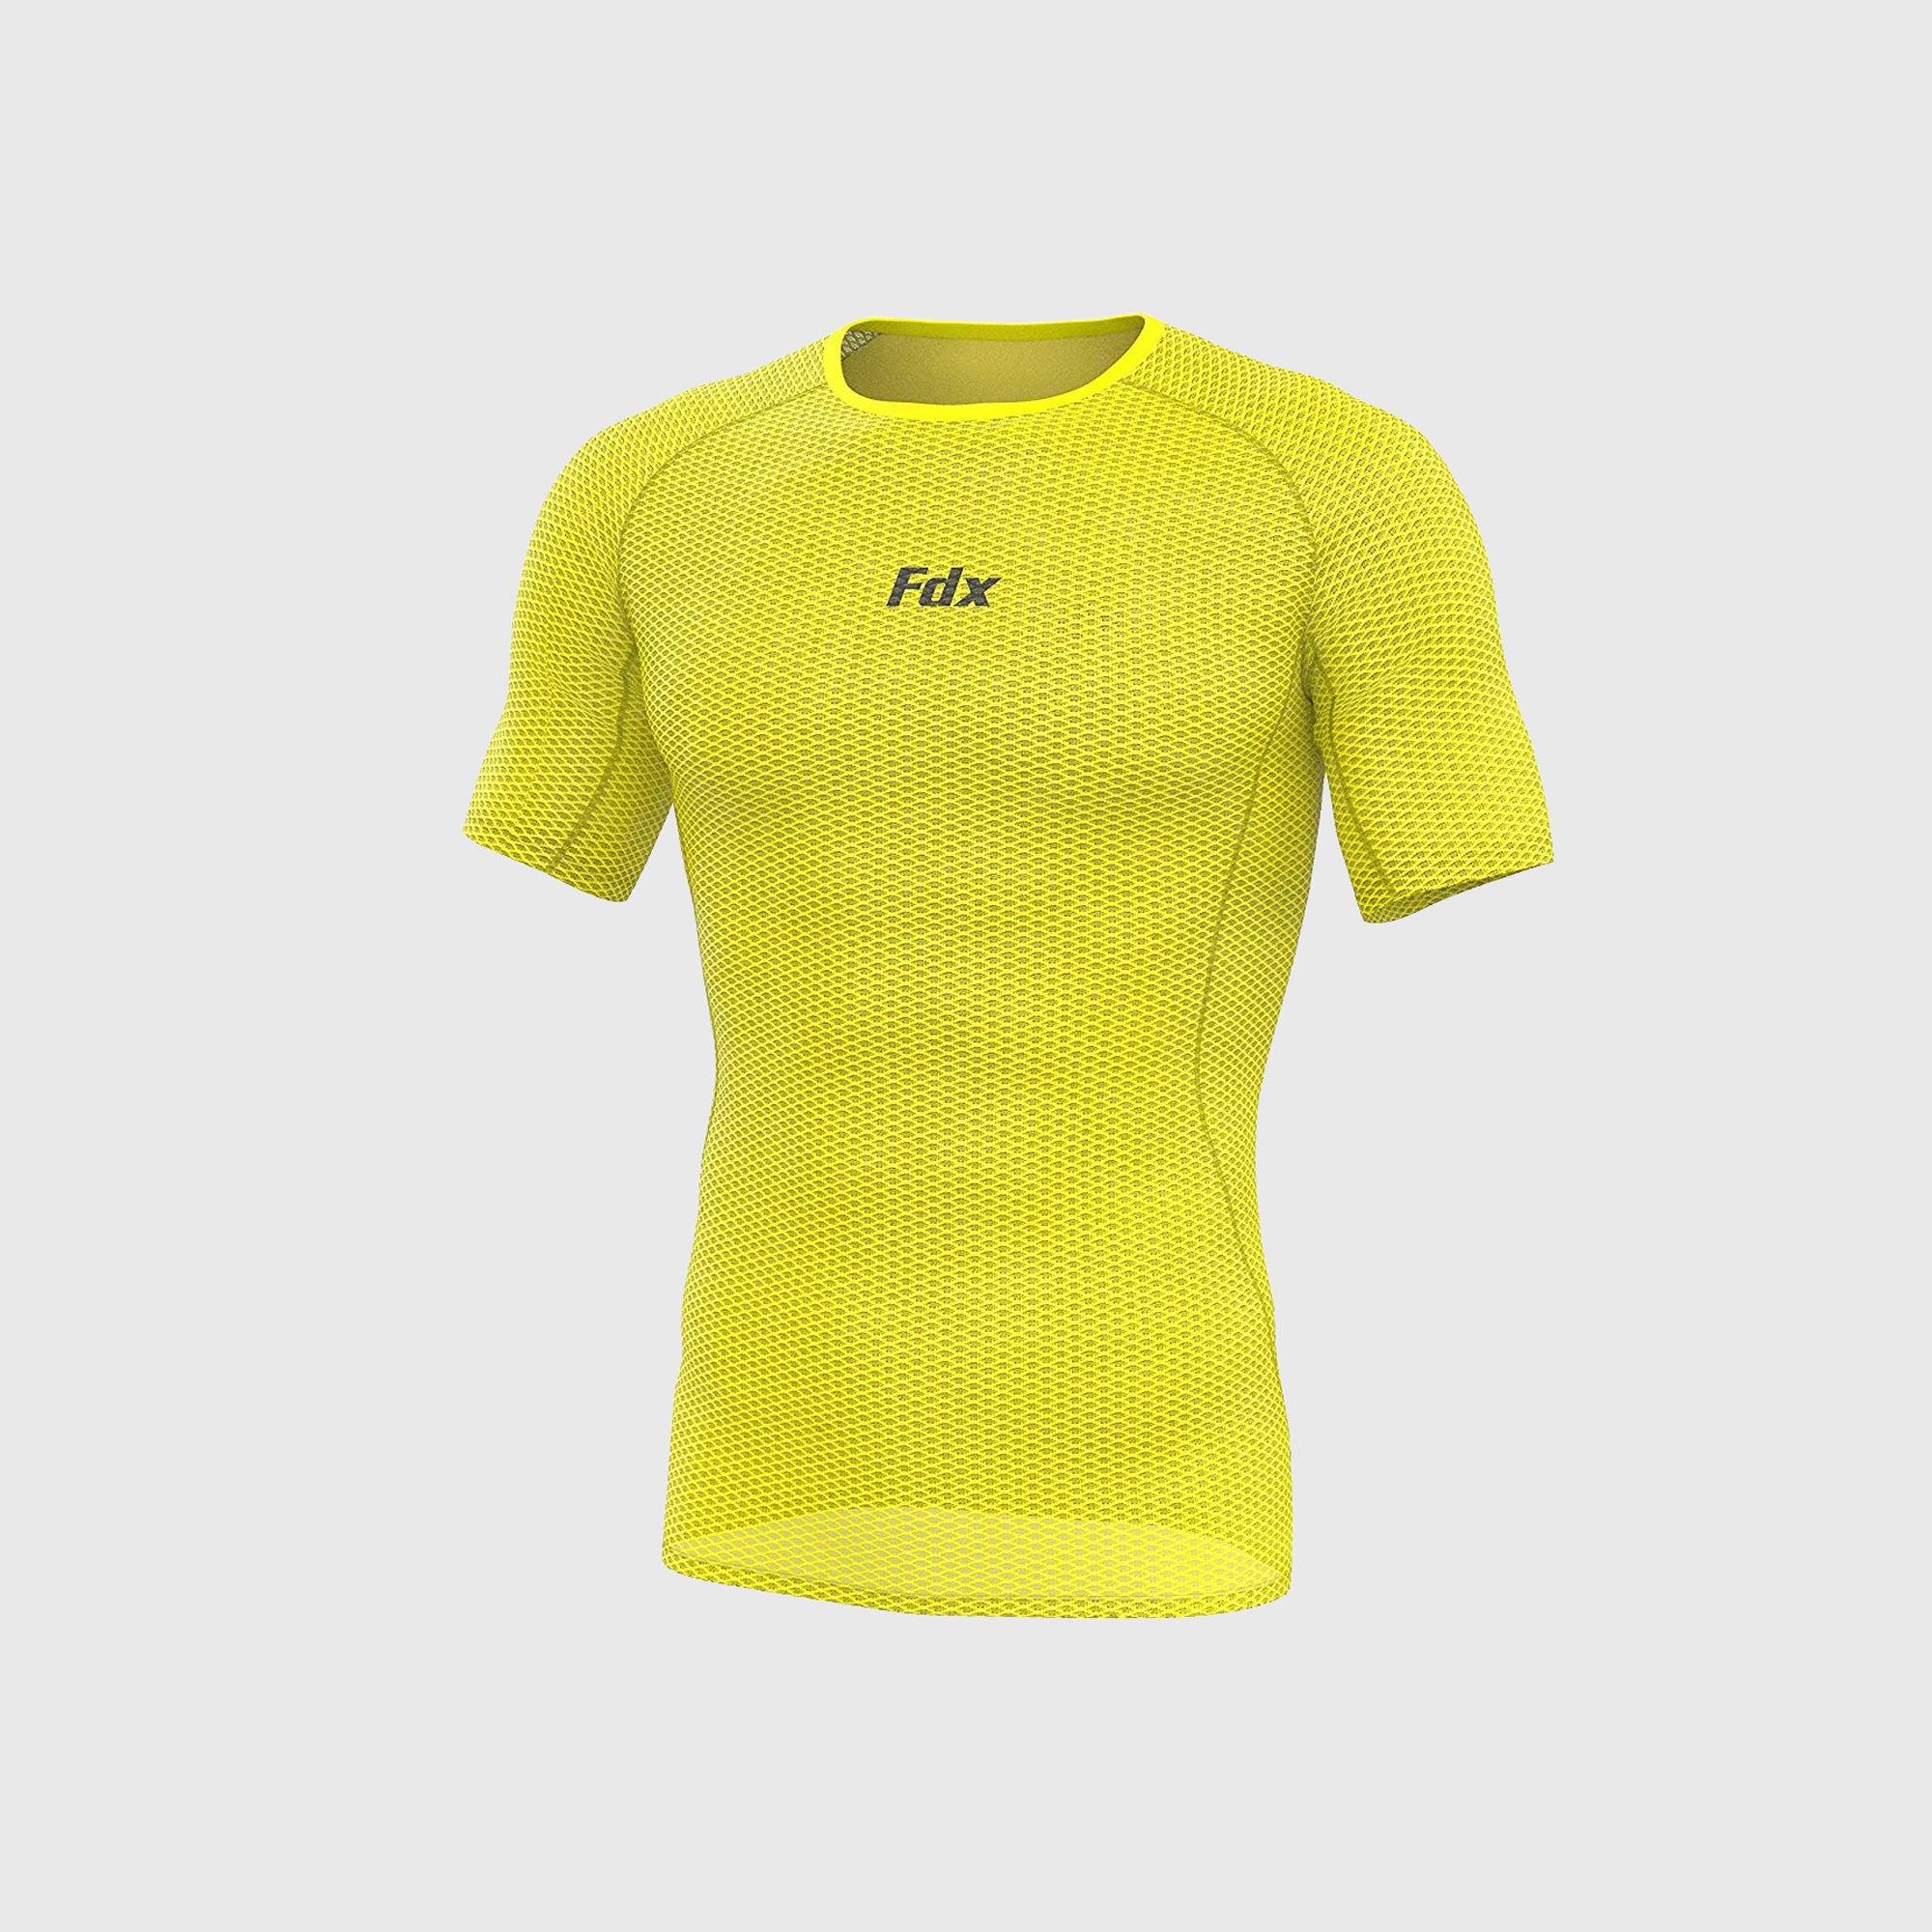 Fdx Mens Yellow Short Sleeve Mesh Compression Top Running Gym Workout Wear Rash Guard Stretchable Breathable - Aeroform